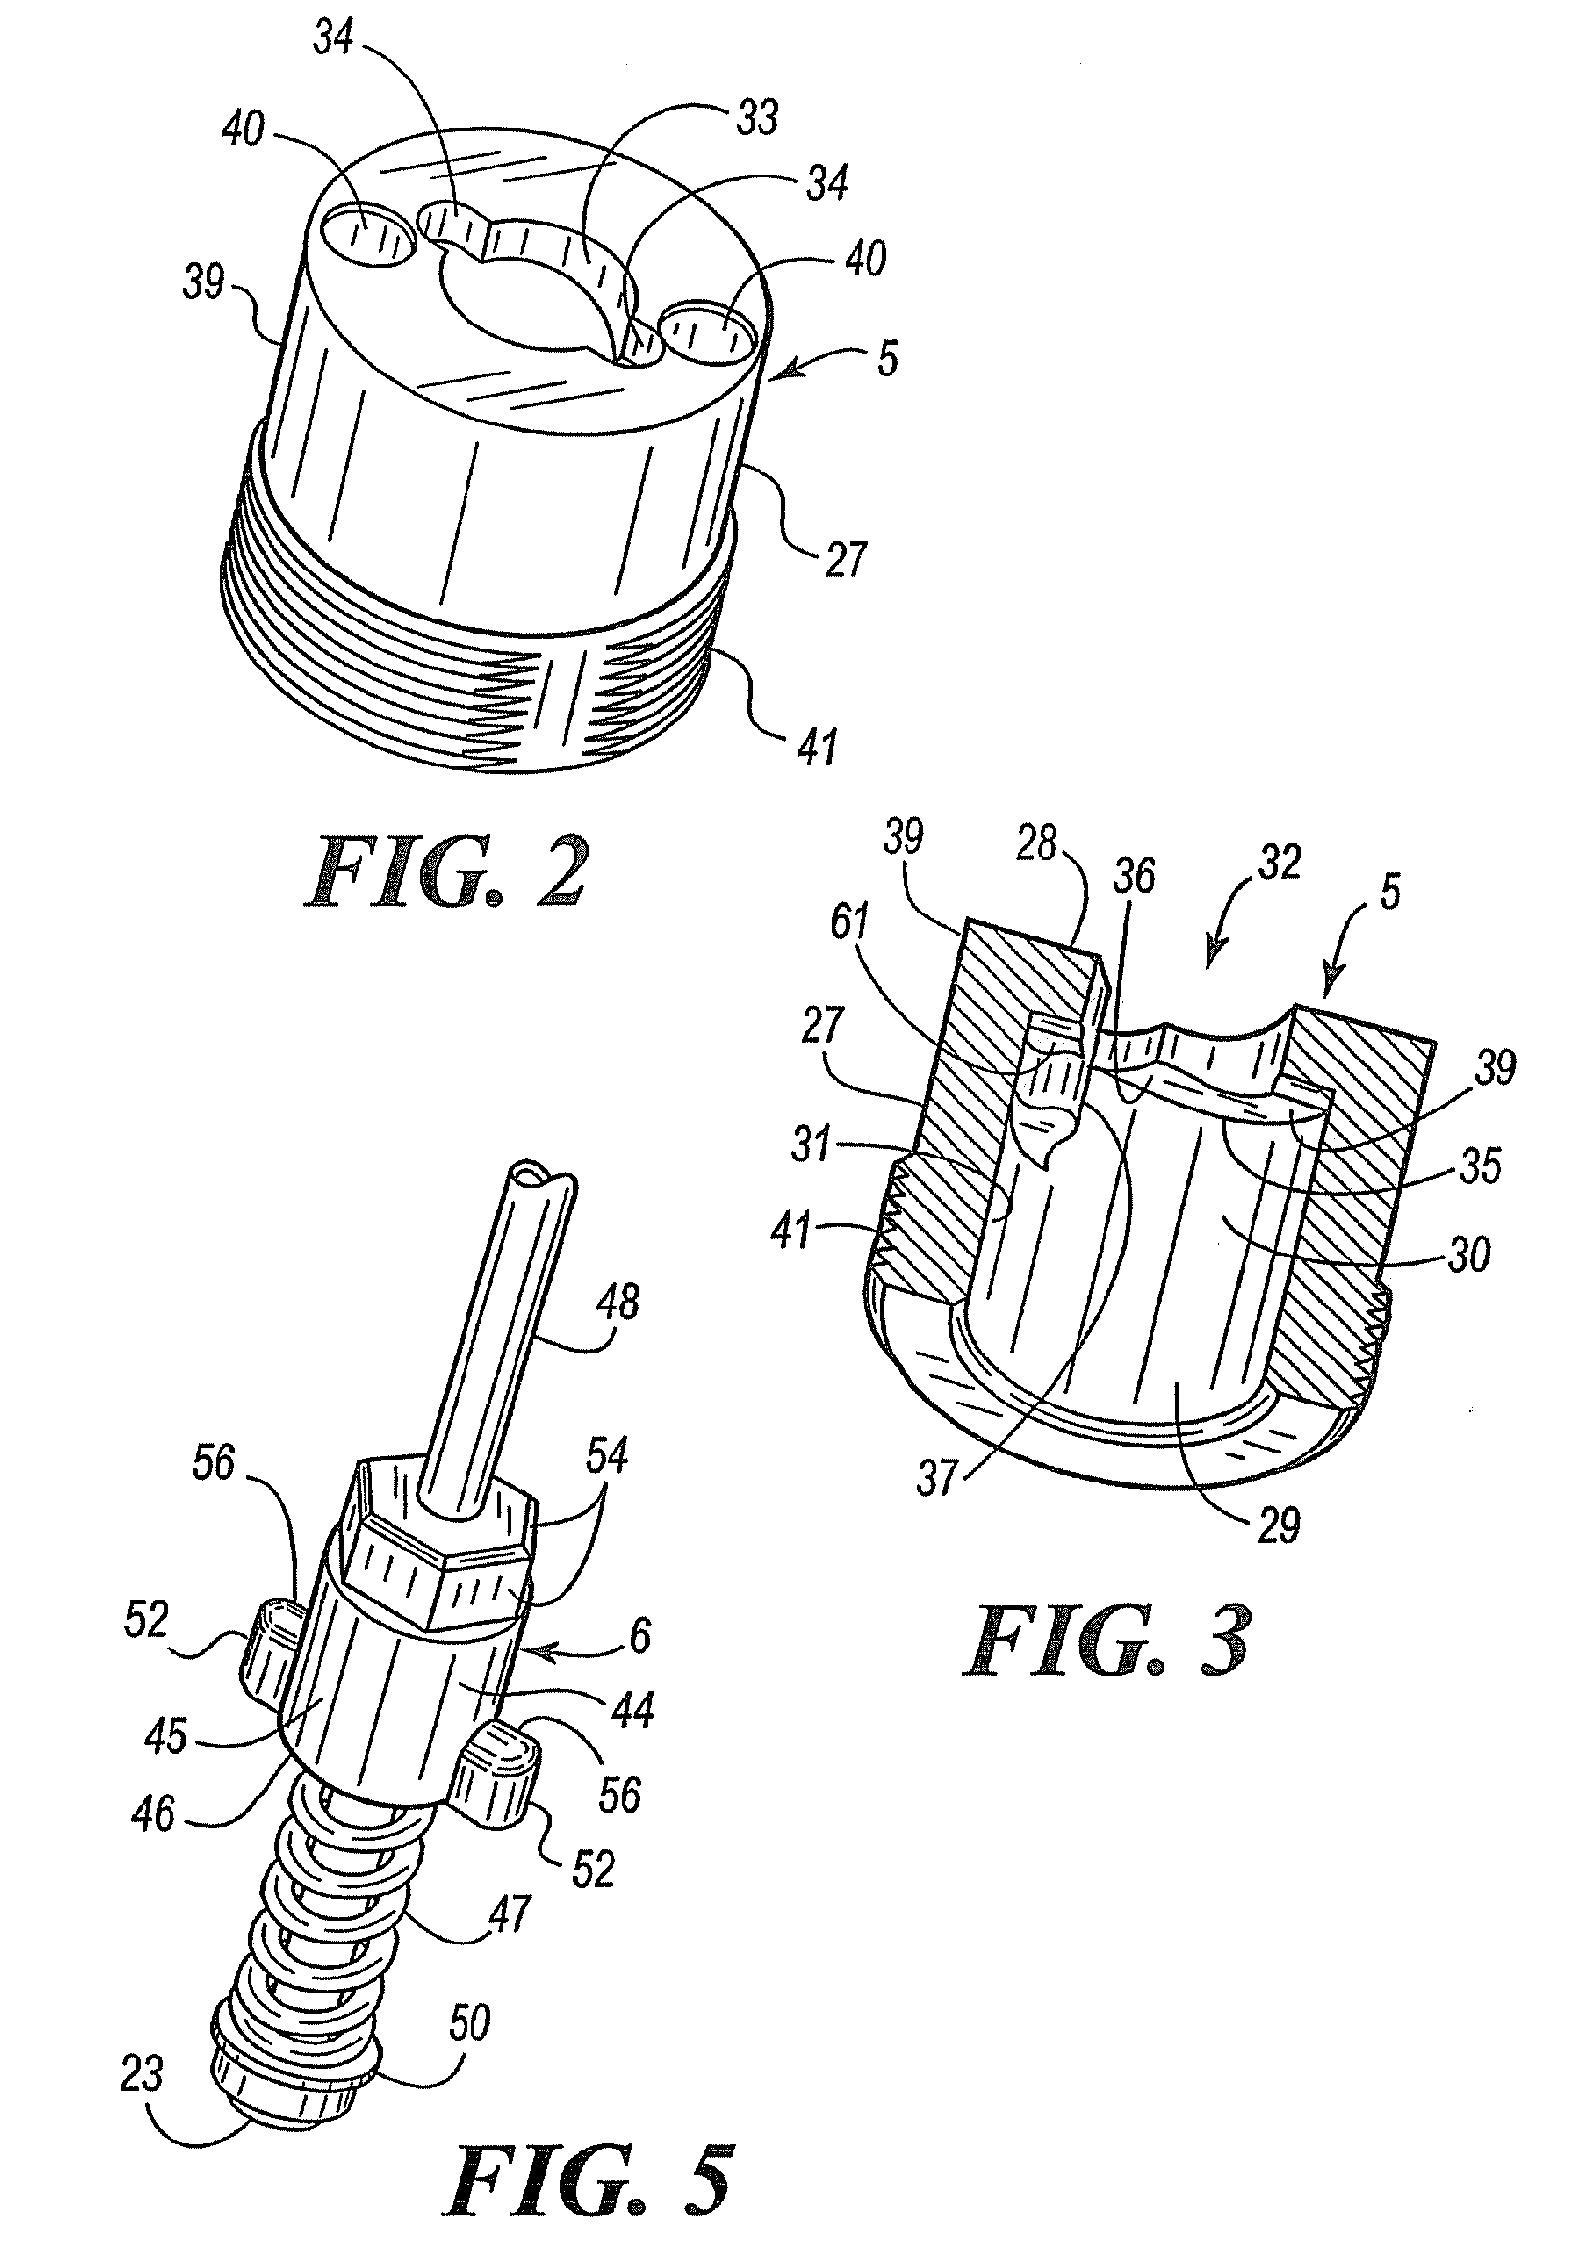 Quick connect thermocouple mounting device and associated method of use